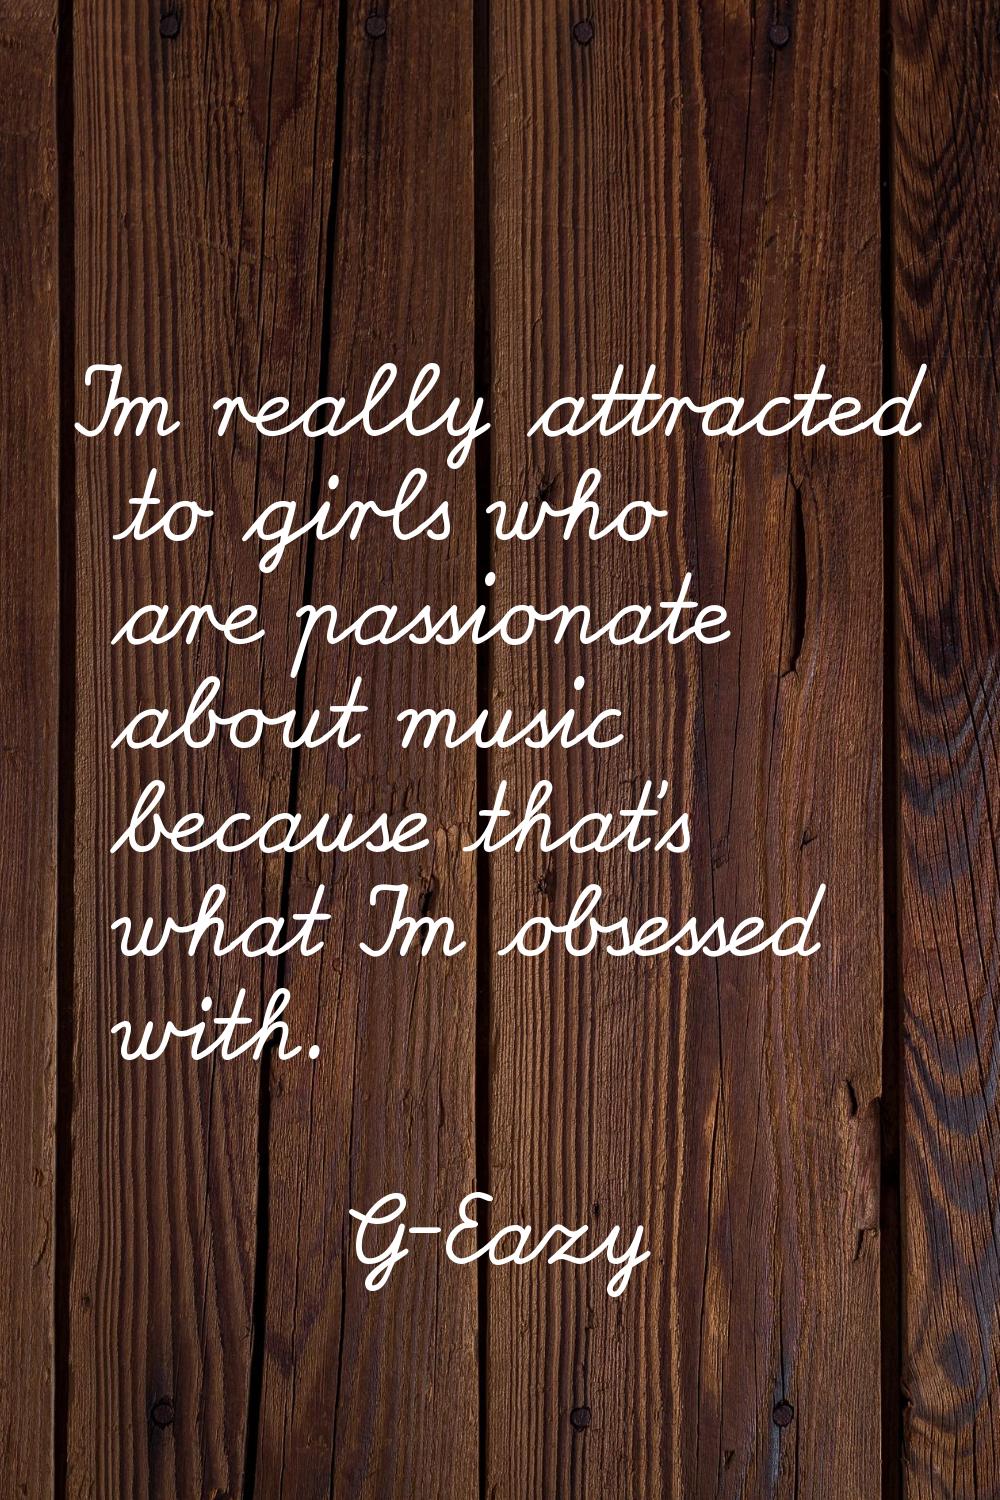 I'm really attracted to girls who are passionate about music because that's what I'm obsessed with.